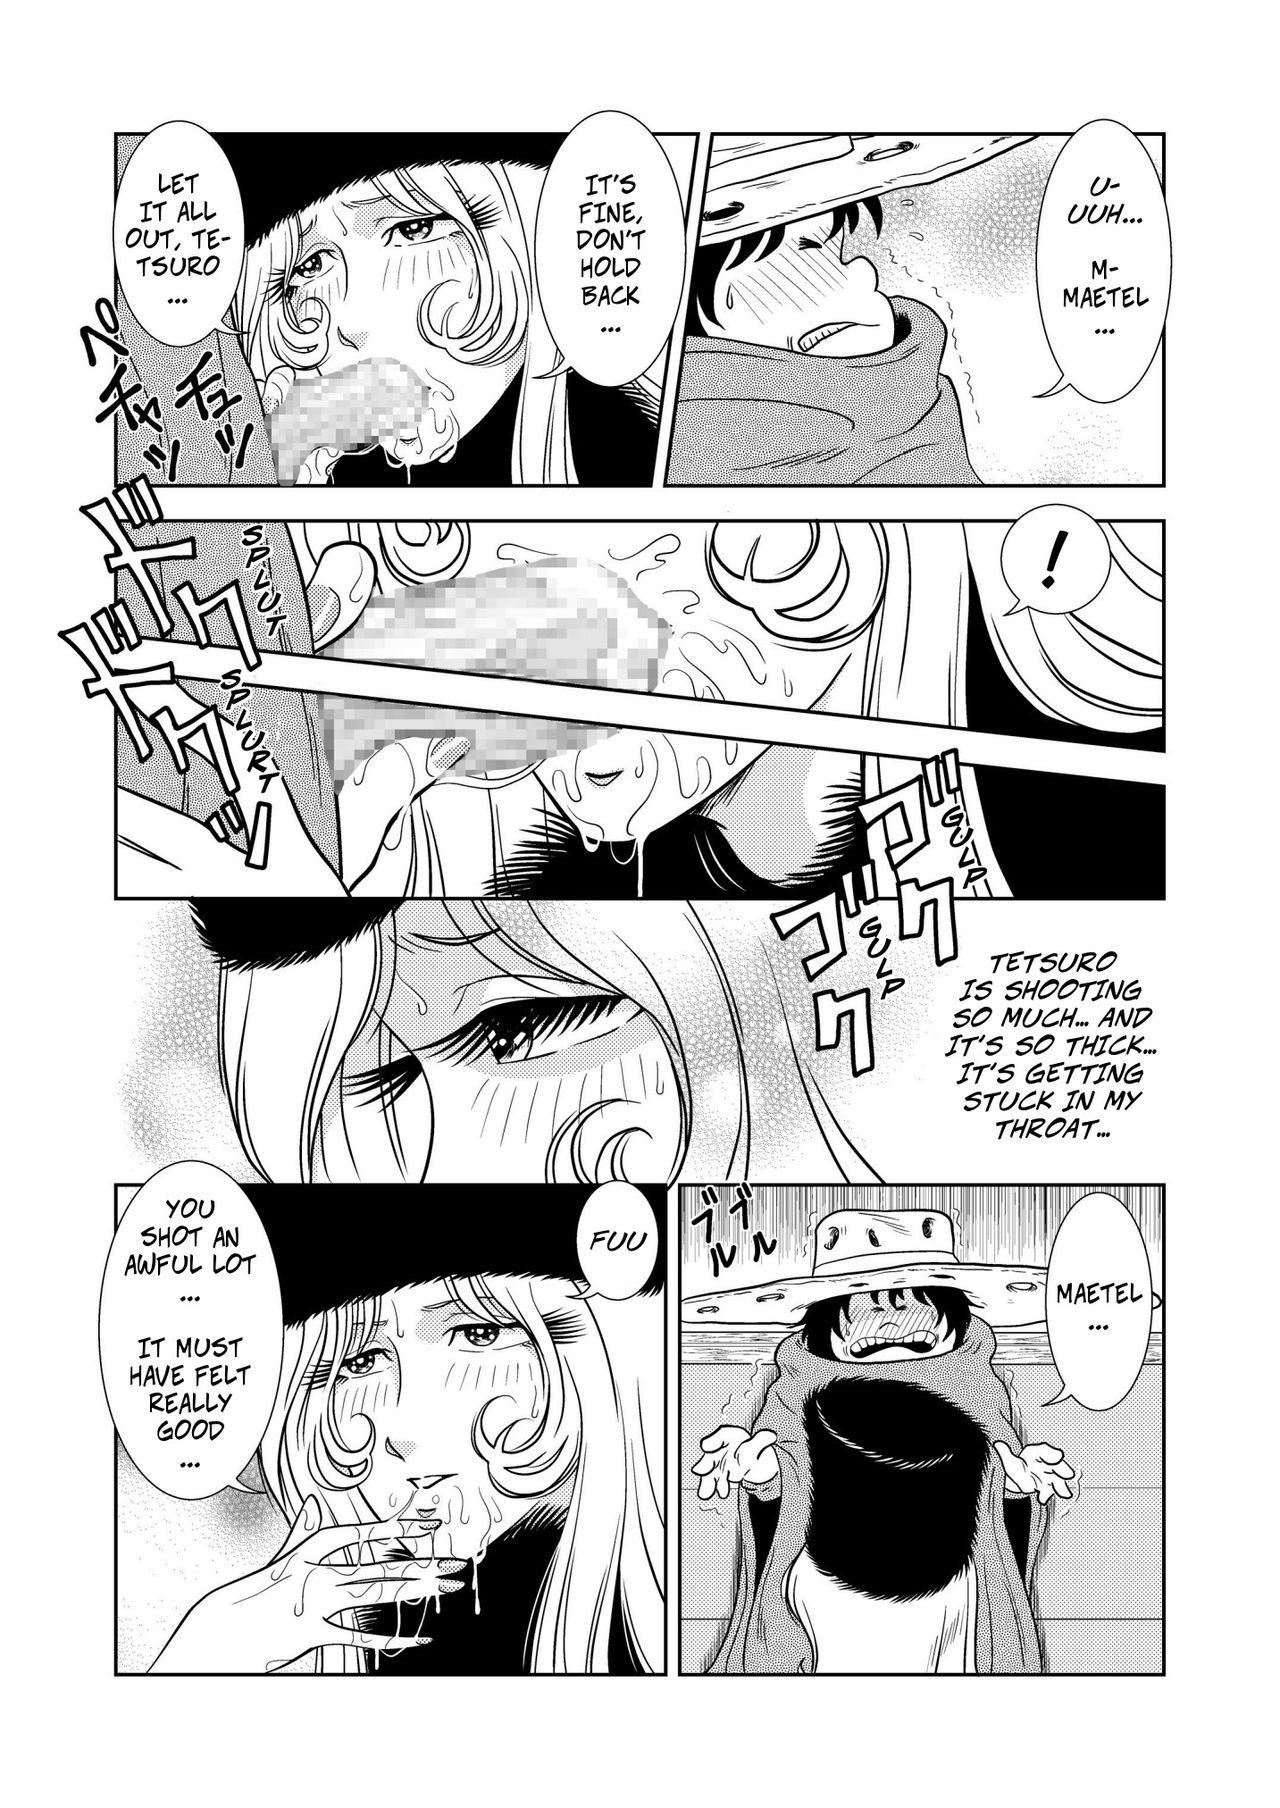 Amateur Free Porn Maetel Story 2 - Galaxy express 999 Ass Fuck - Page 10